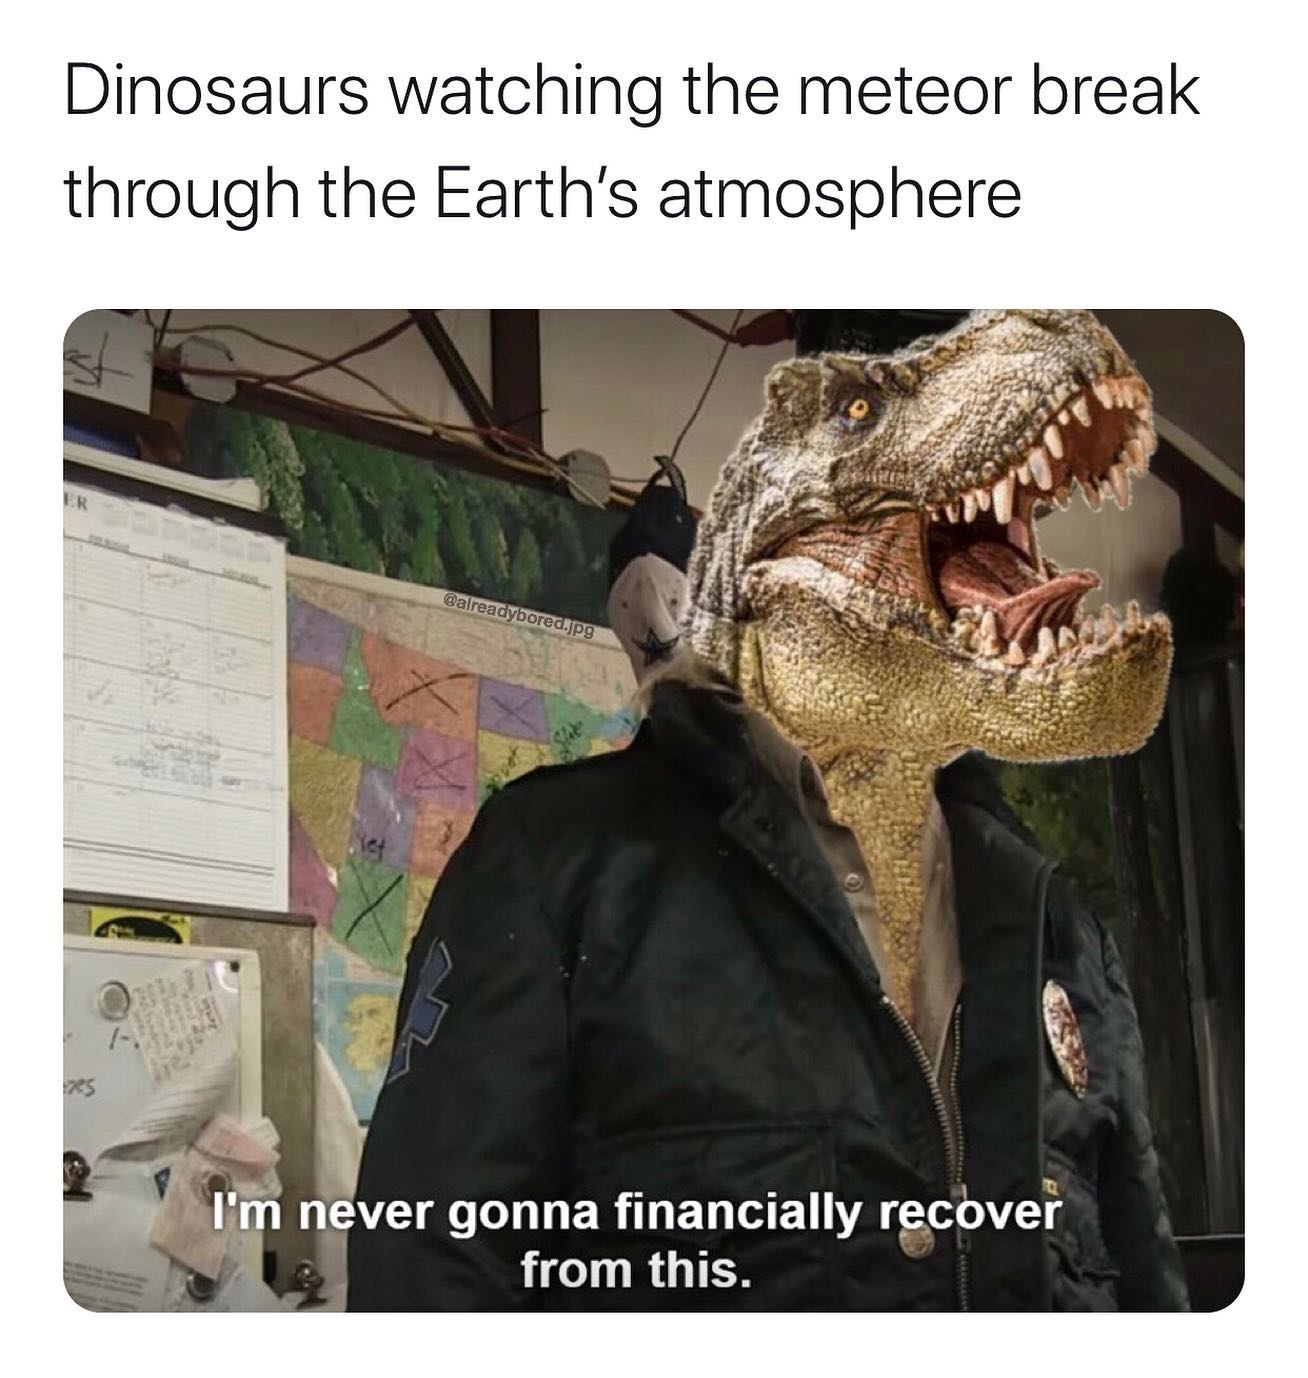 dinosaur - Dinosaurs watching the meteor break through the Earth's atmosphere .jpg . I'm never gonna financially recover from this.